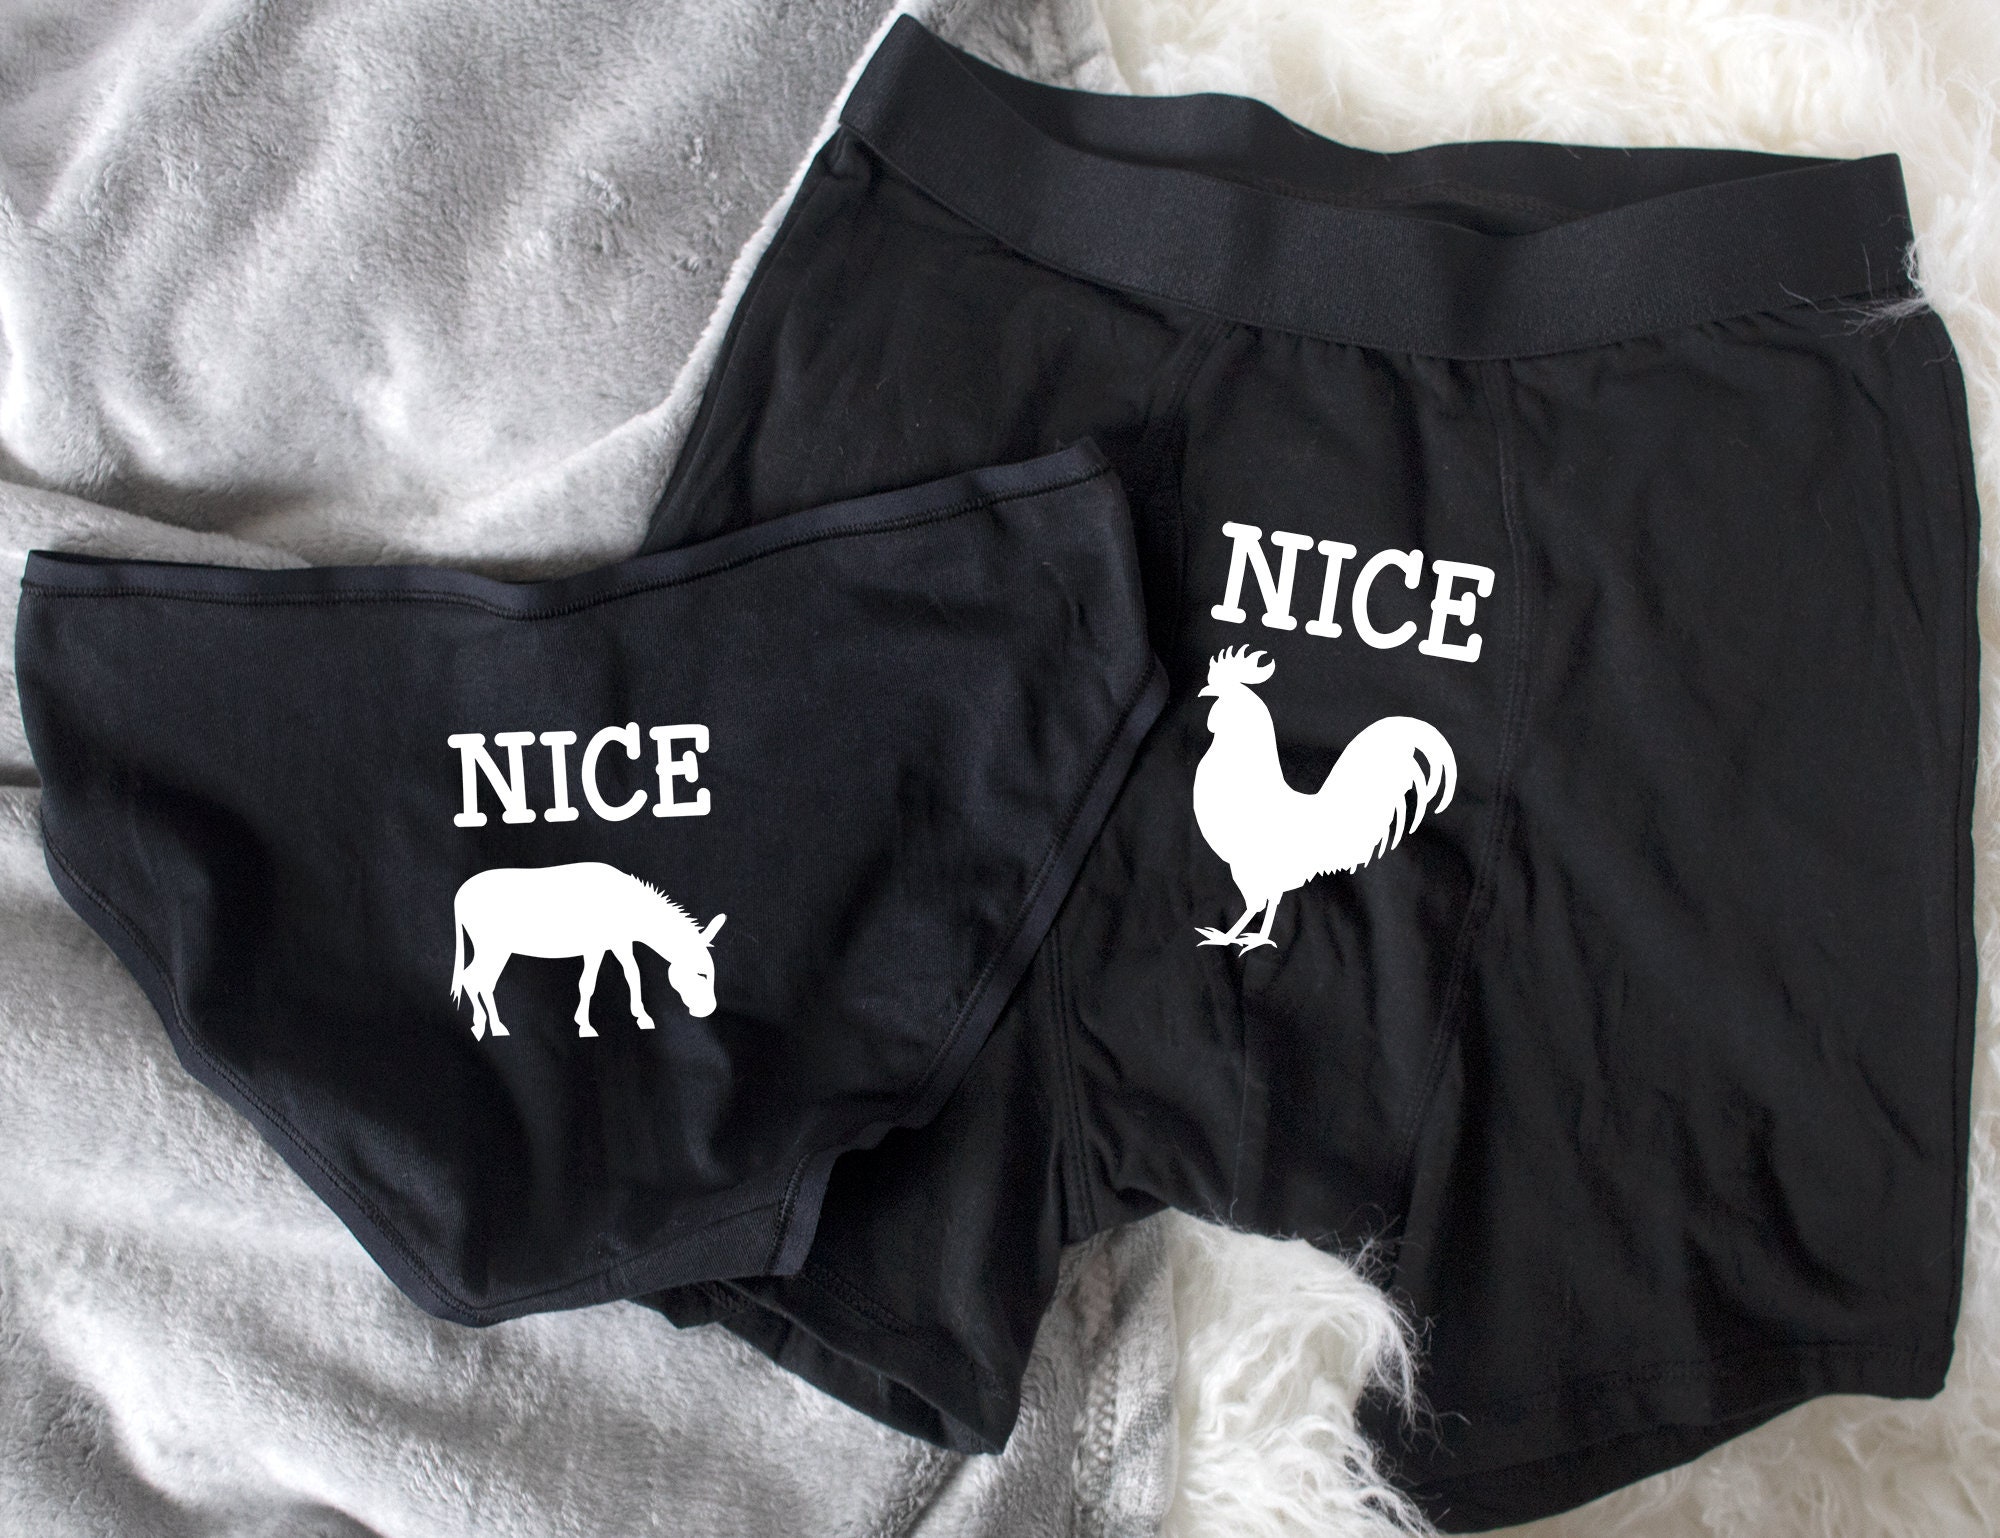 Funny 'Best In Show' Underwear For Men And Women By Twisted Twee